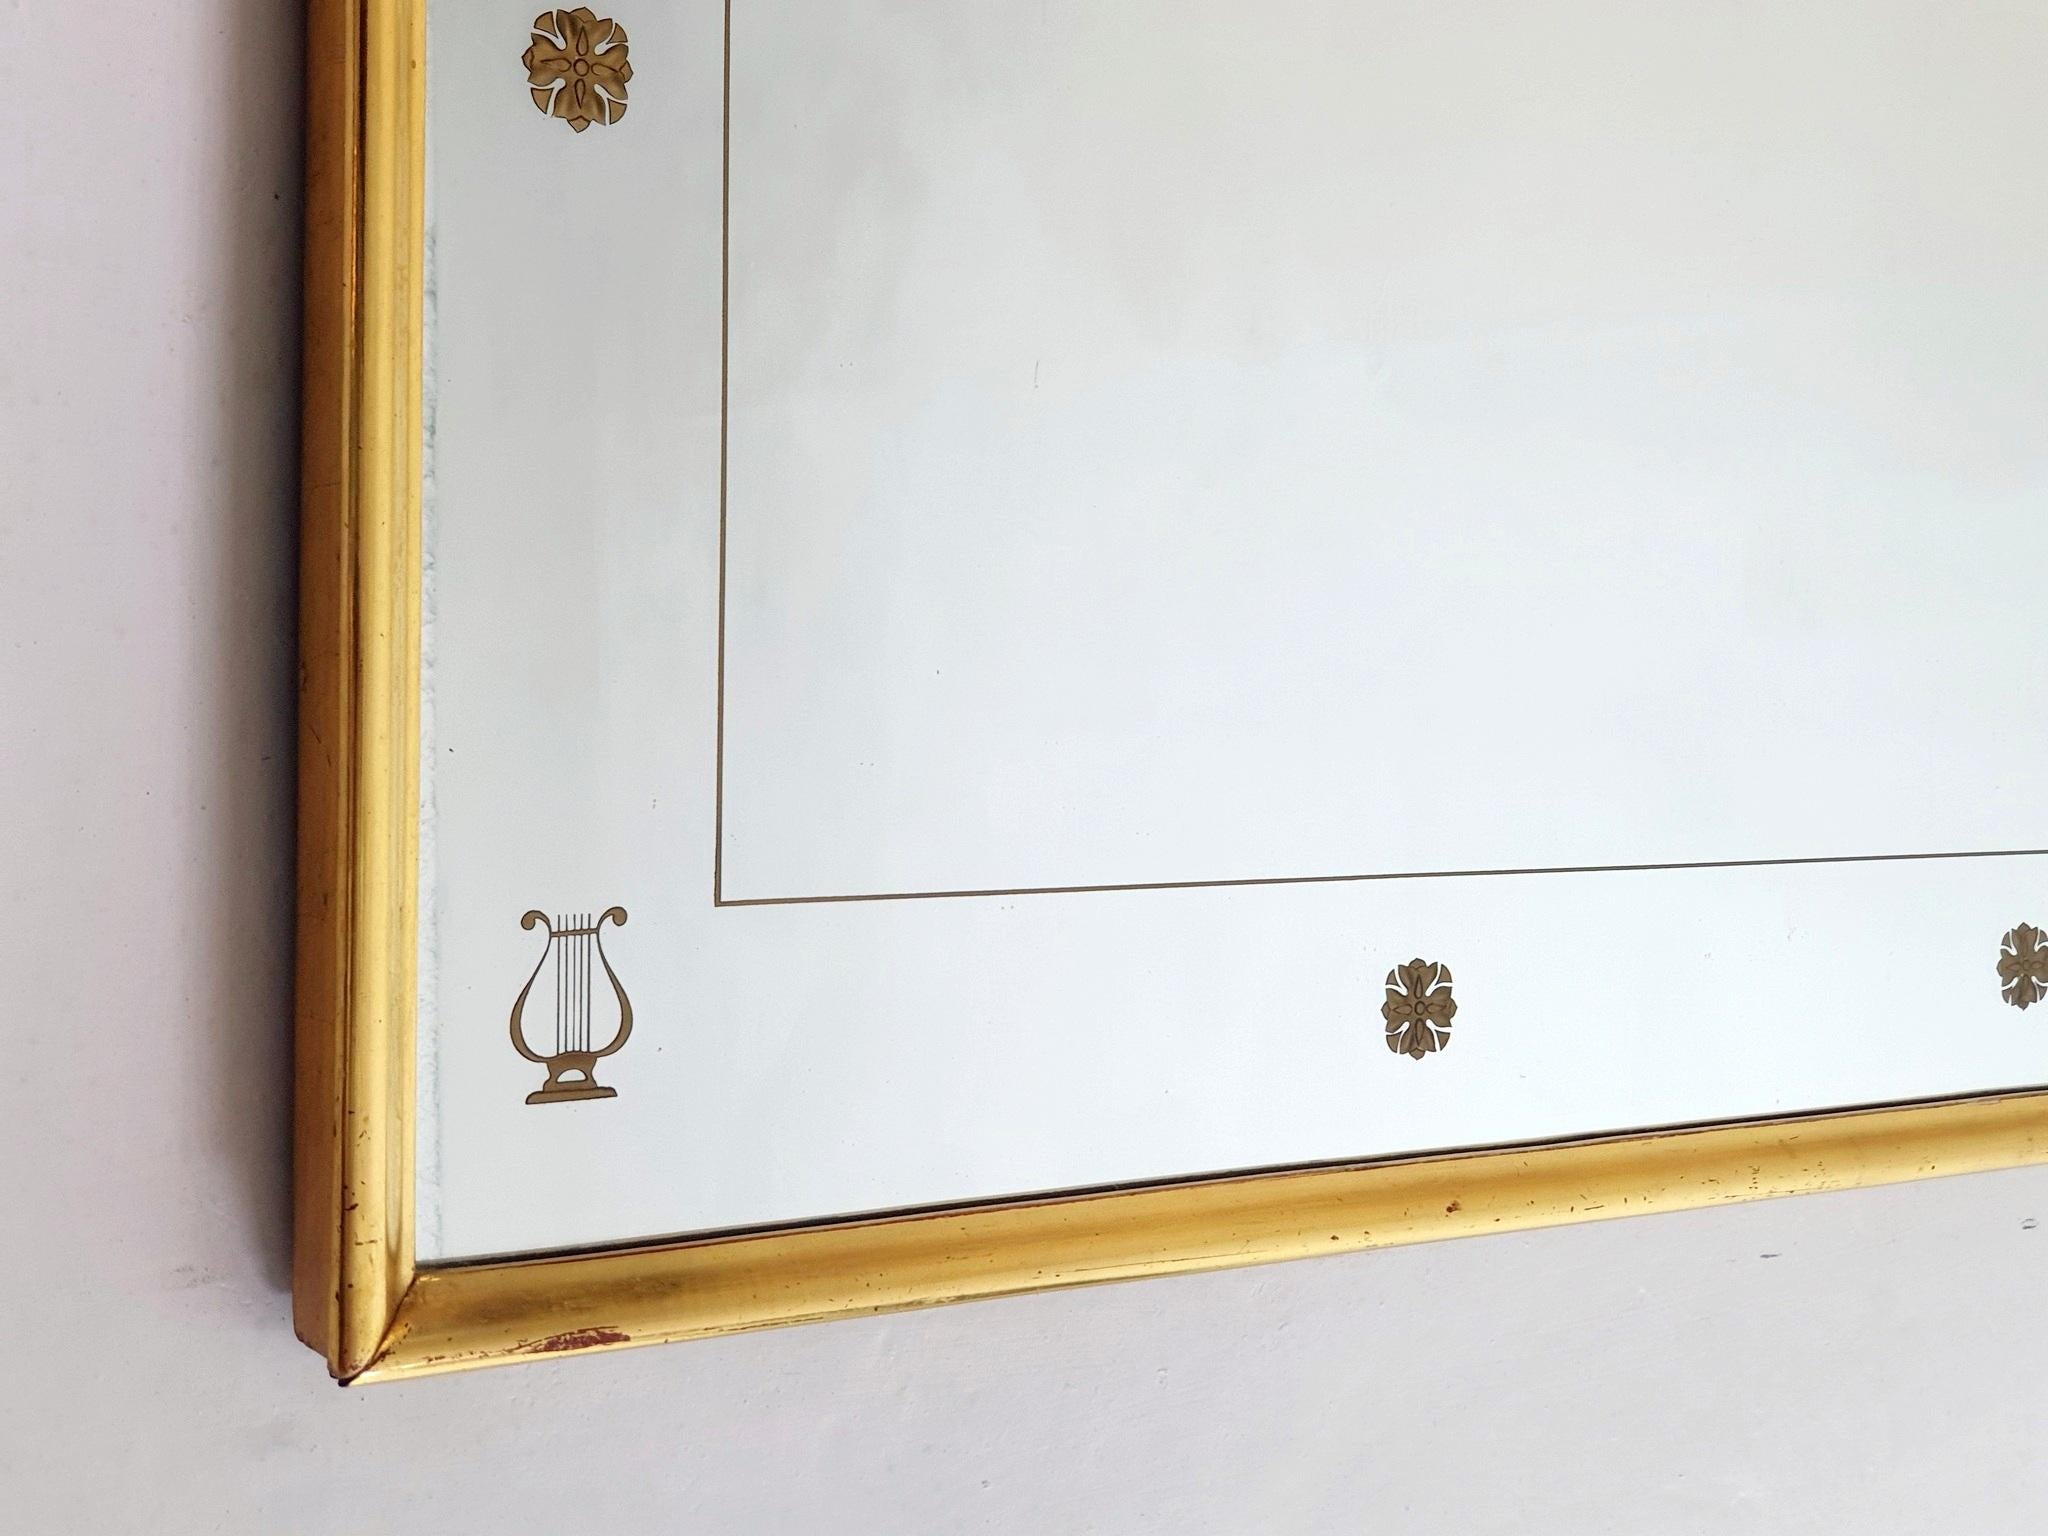 An extaordinary large full lenght wall mirror from the 1950's with a neoclassic design in the manner of Gio Ponti. The glass is in very good condition with small decorations in gold in the shape of lyras and roses. The frame and construction is made